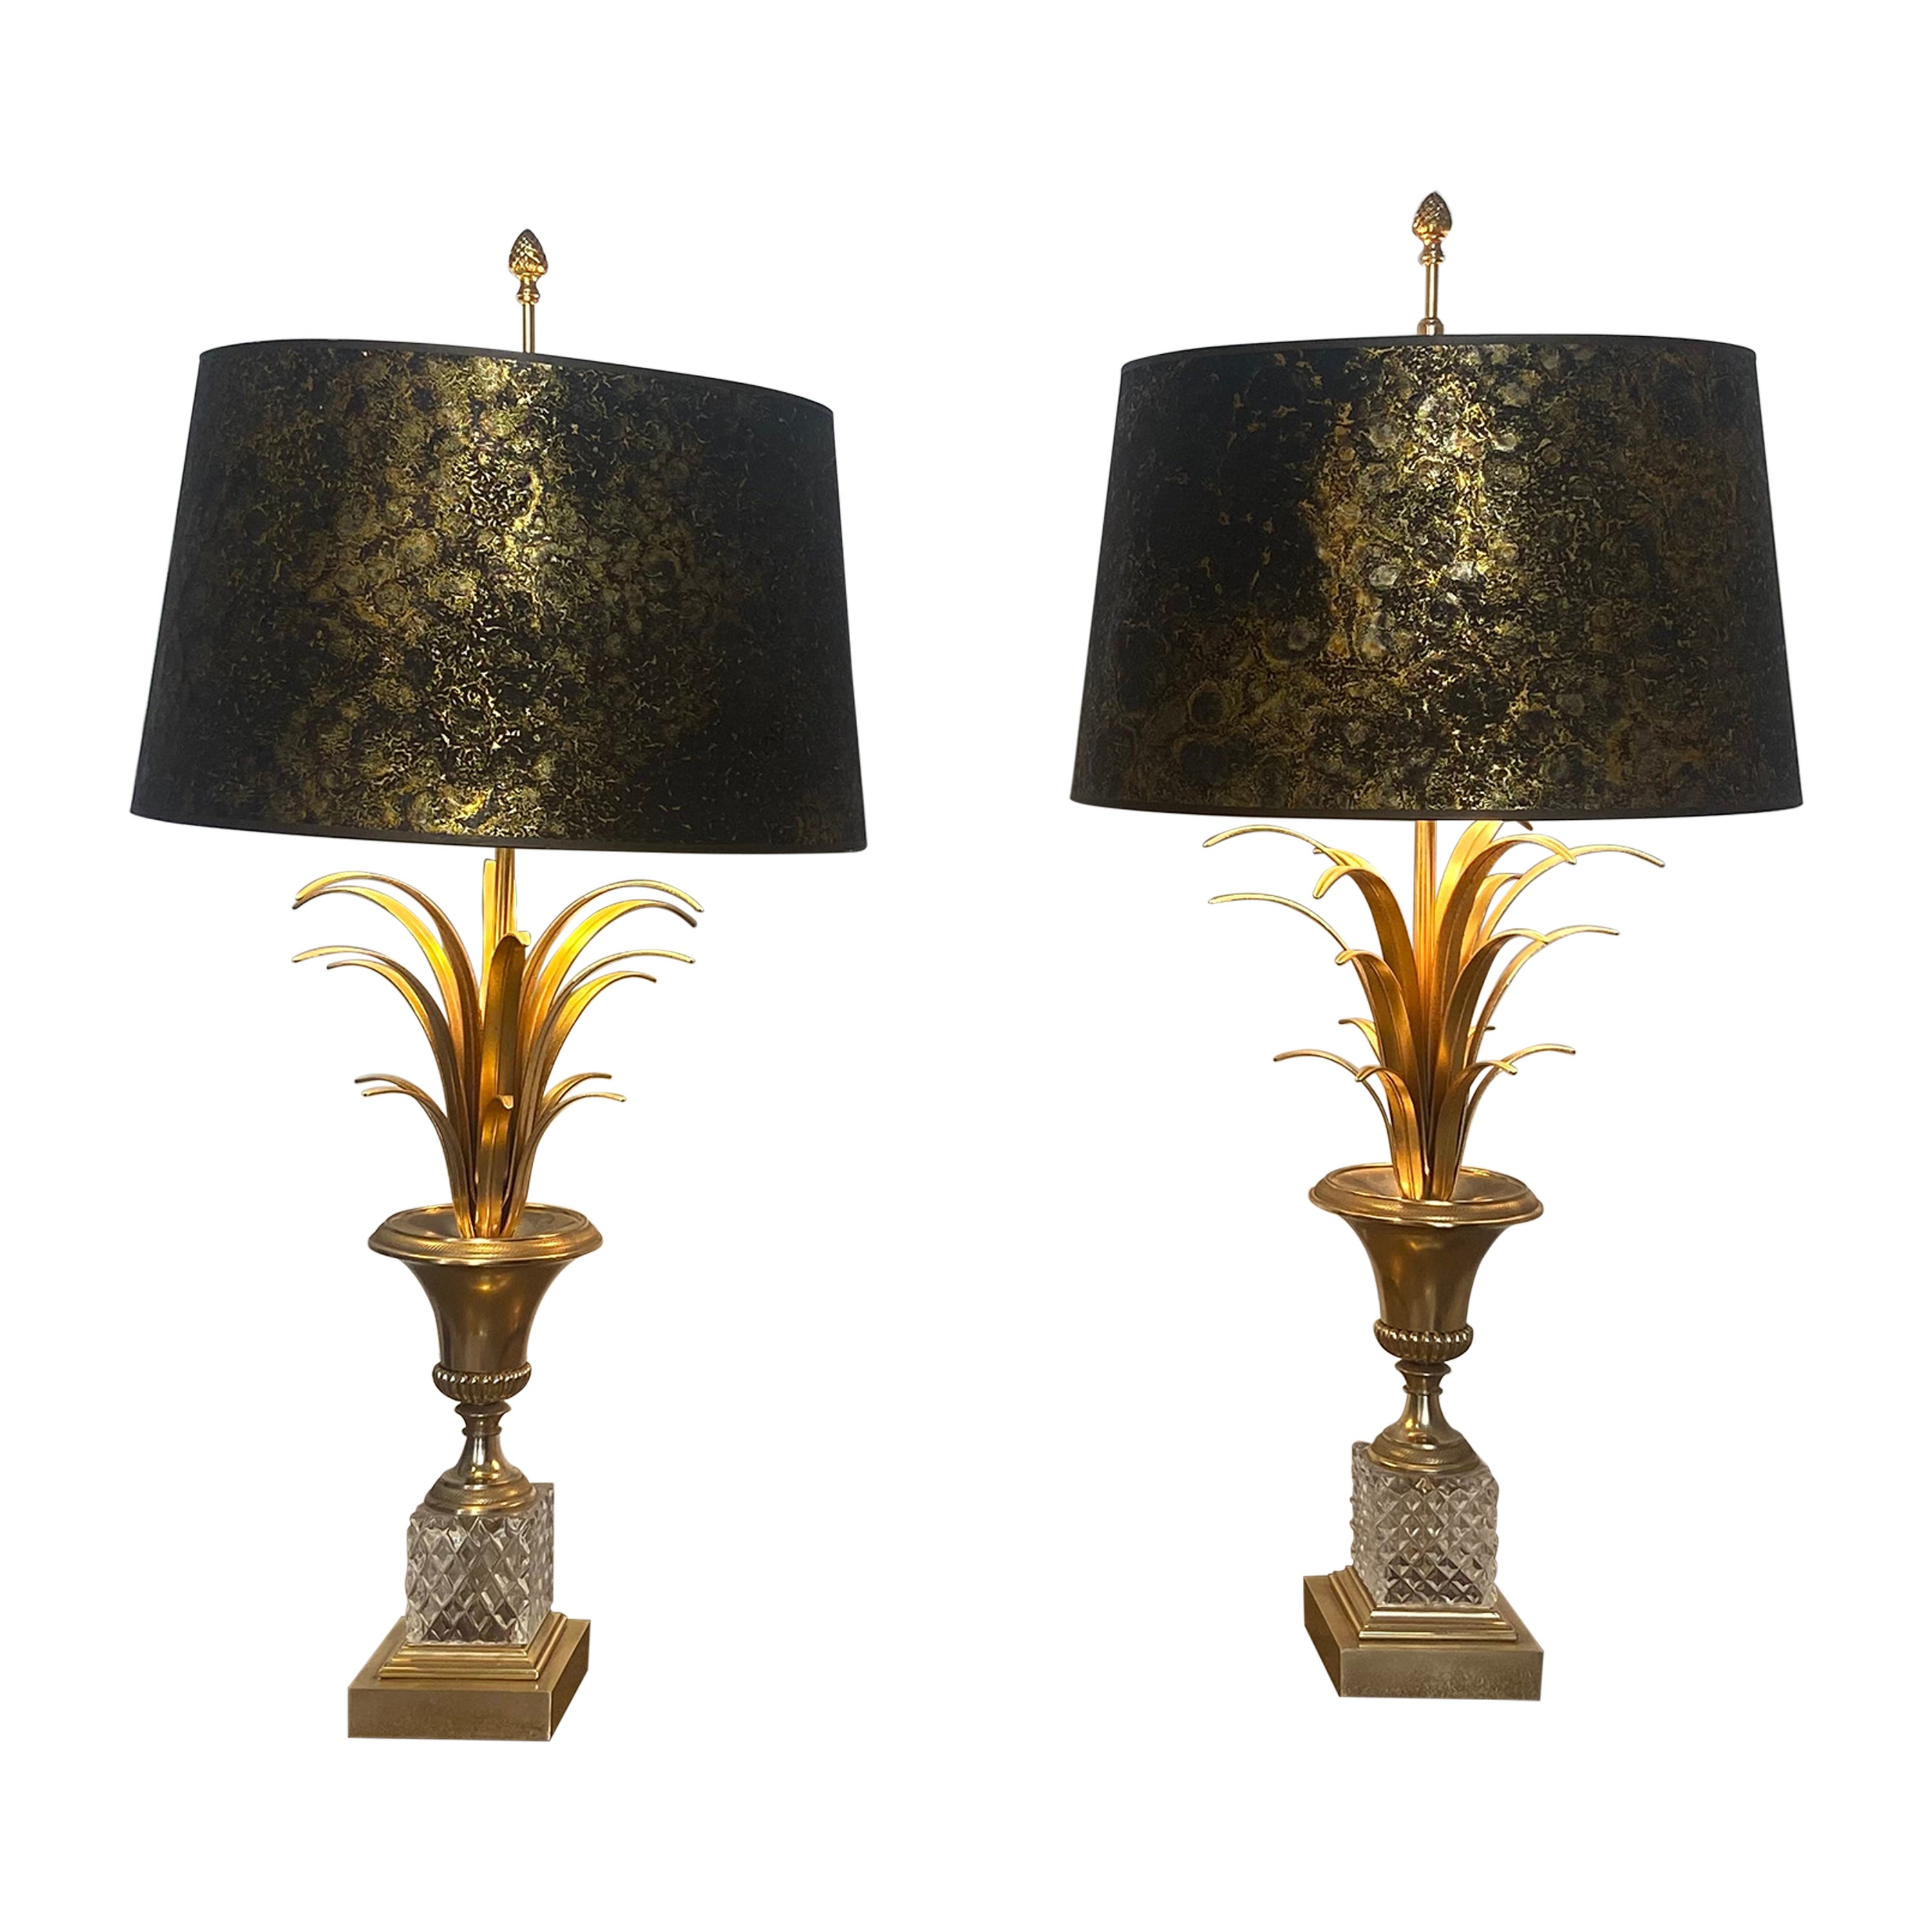 Pair of Palm Tree, Pineapple Lamps from Boulanger, Belgium, 1970